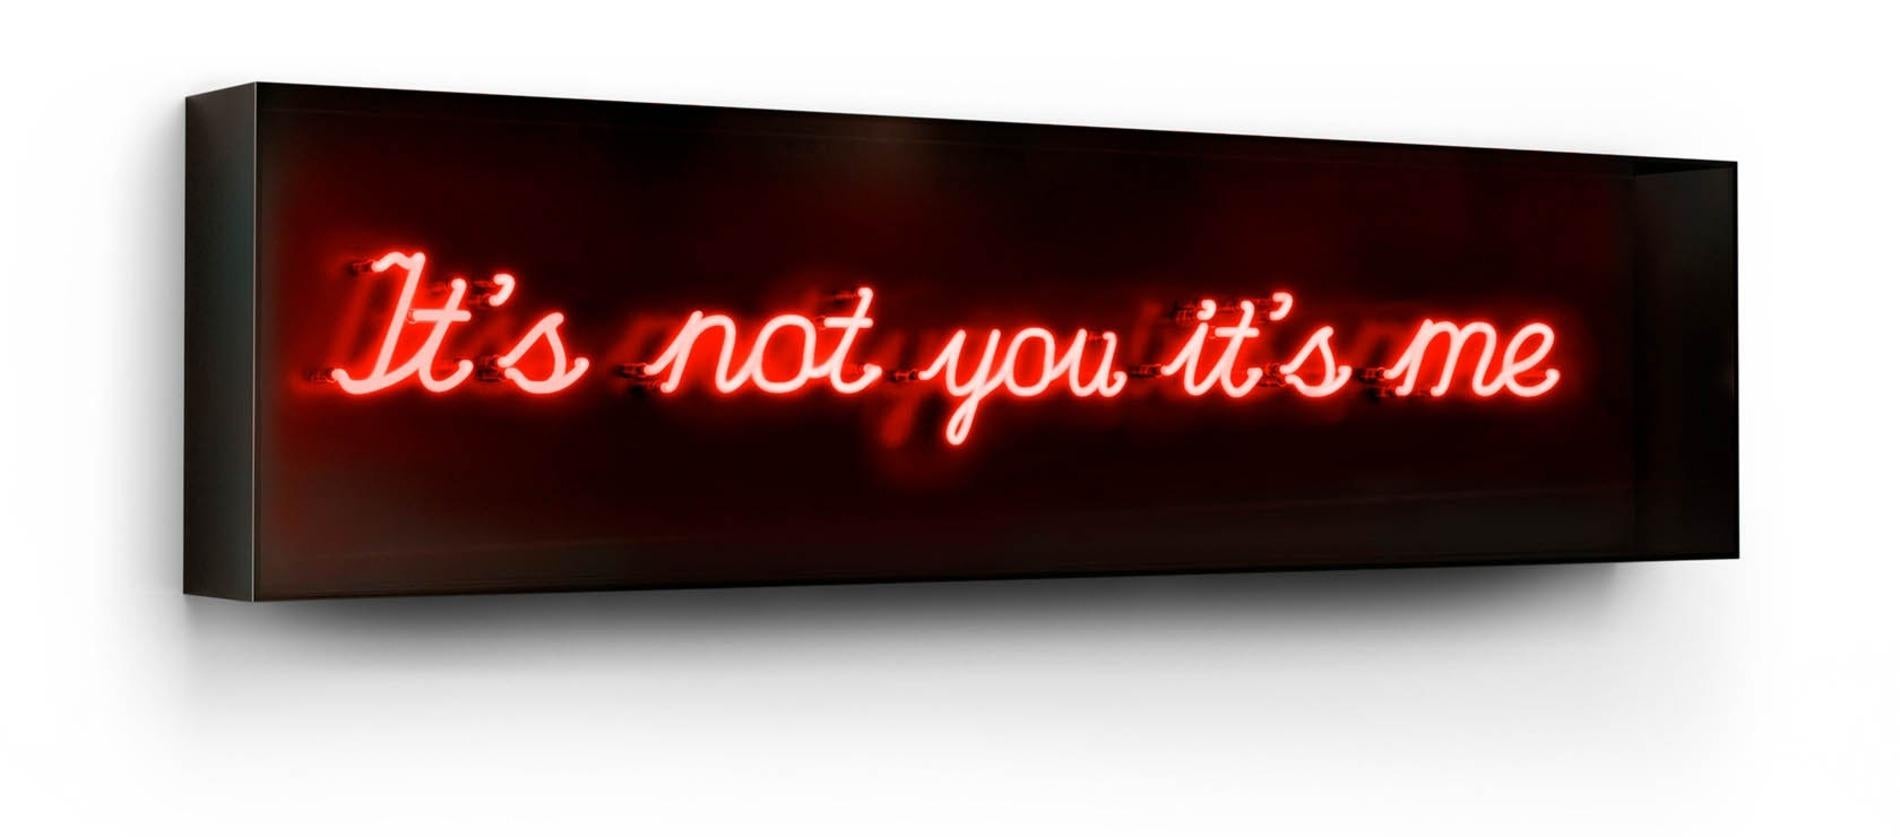 Series: Neon
15" x 60" x 6"- Edition of 9

Disarmingly blunt and intensely intimate, David Drebin's neon light installations illuminate hidden aspirations and secret thoughts of the femmes fatales who inhabit the elusive world of his iconic